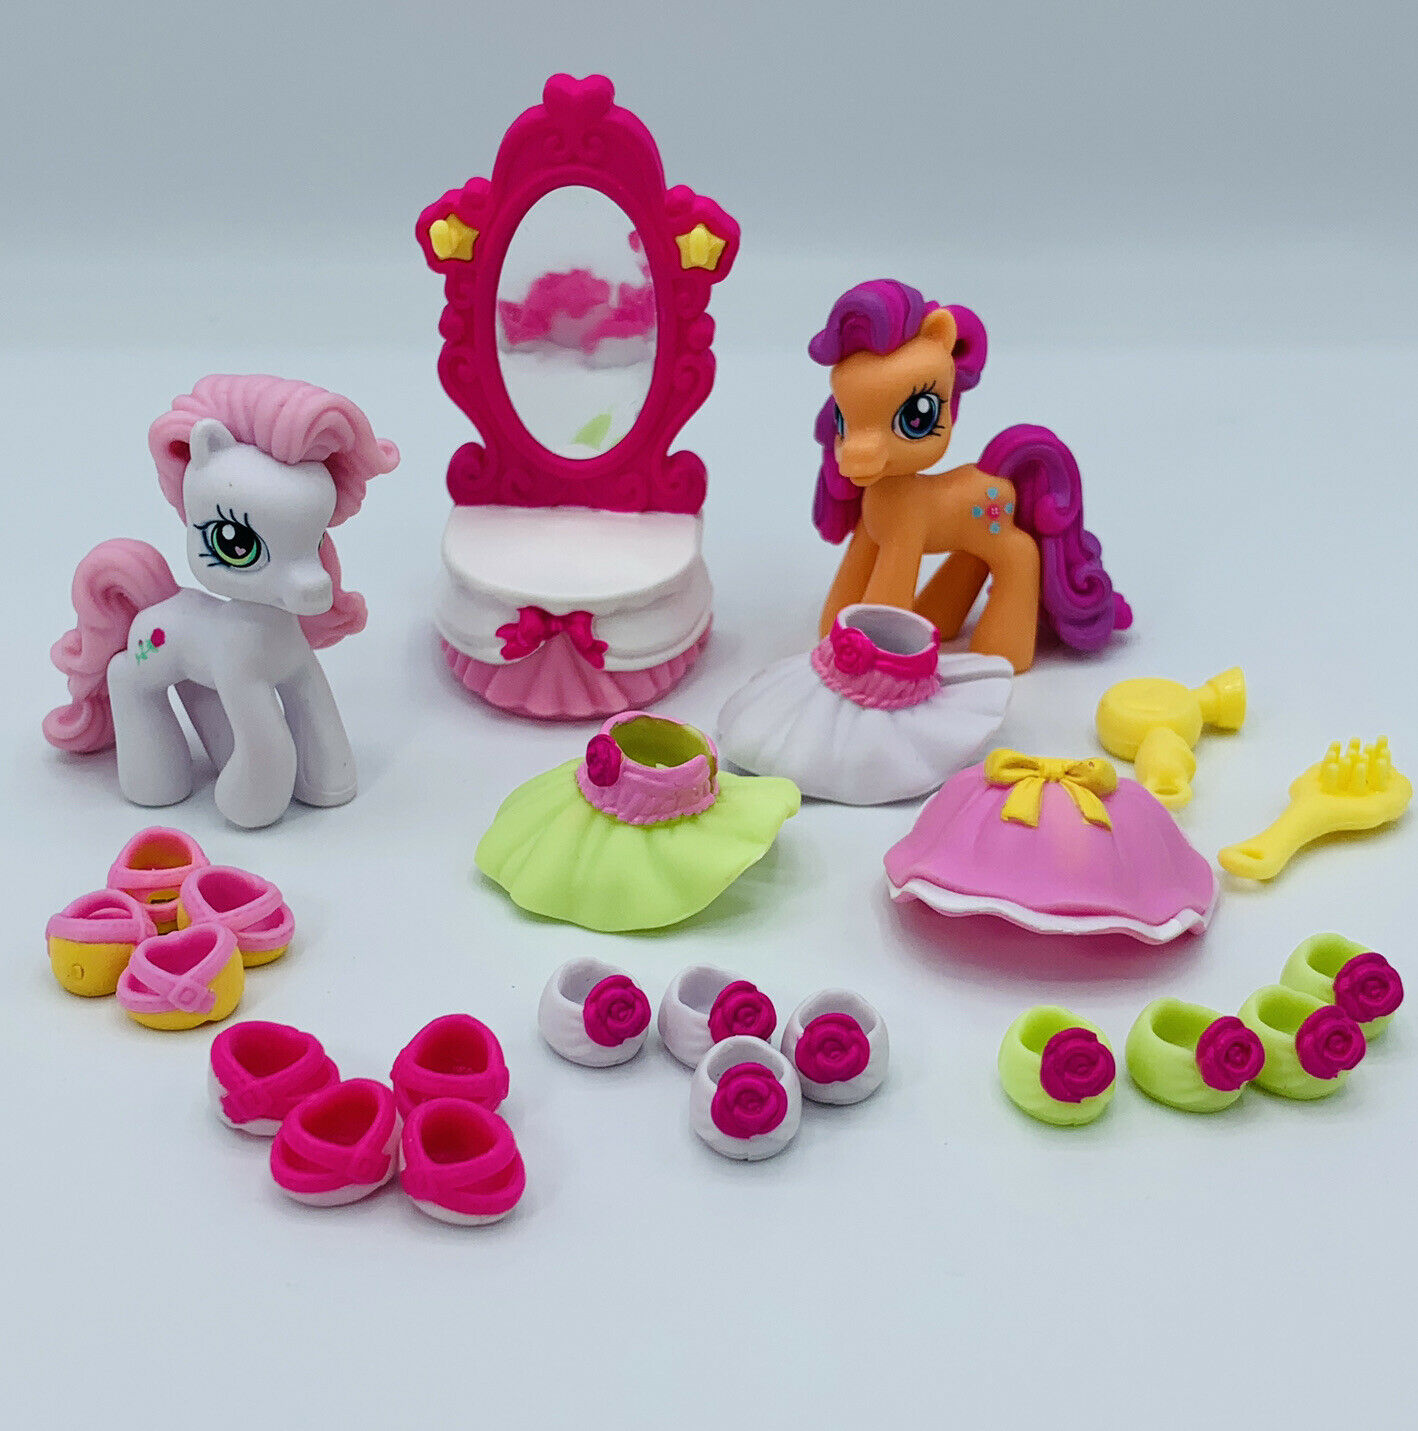 My Little Pony Ponyville Fancy Fashions With Desert Rose And Sew-and-sew Ponies